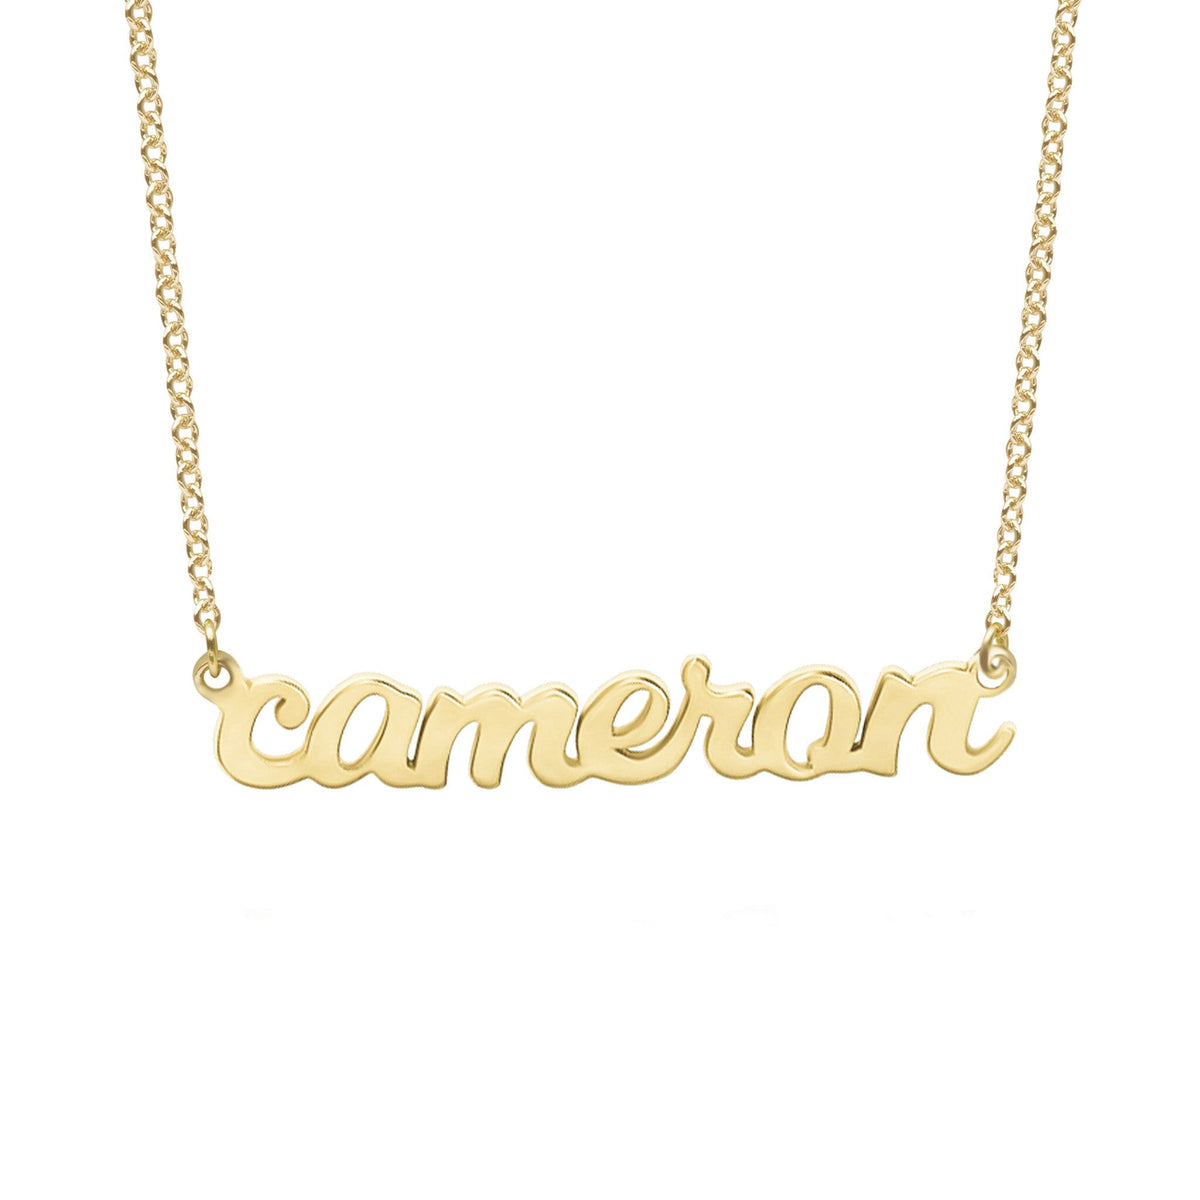 Louis Vuitton Gold Chain ID Necklace